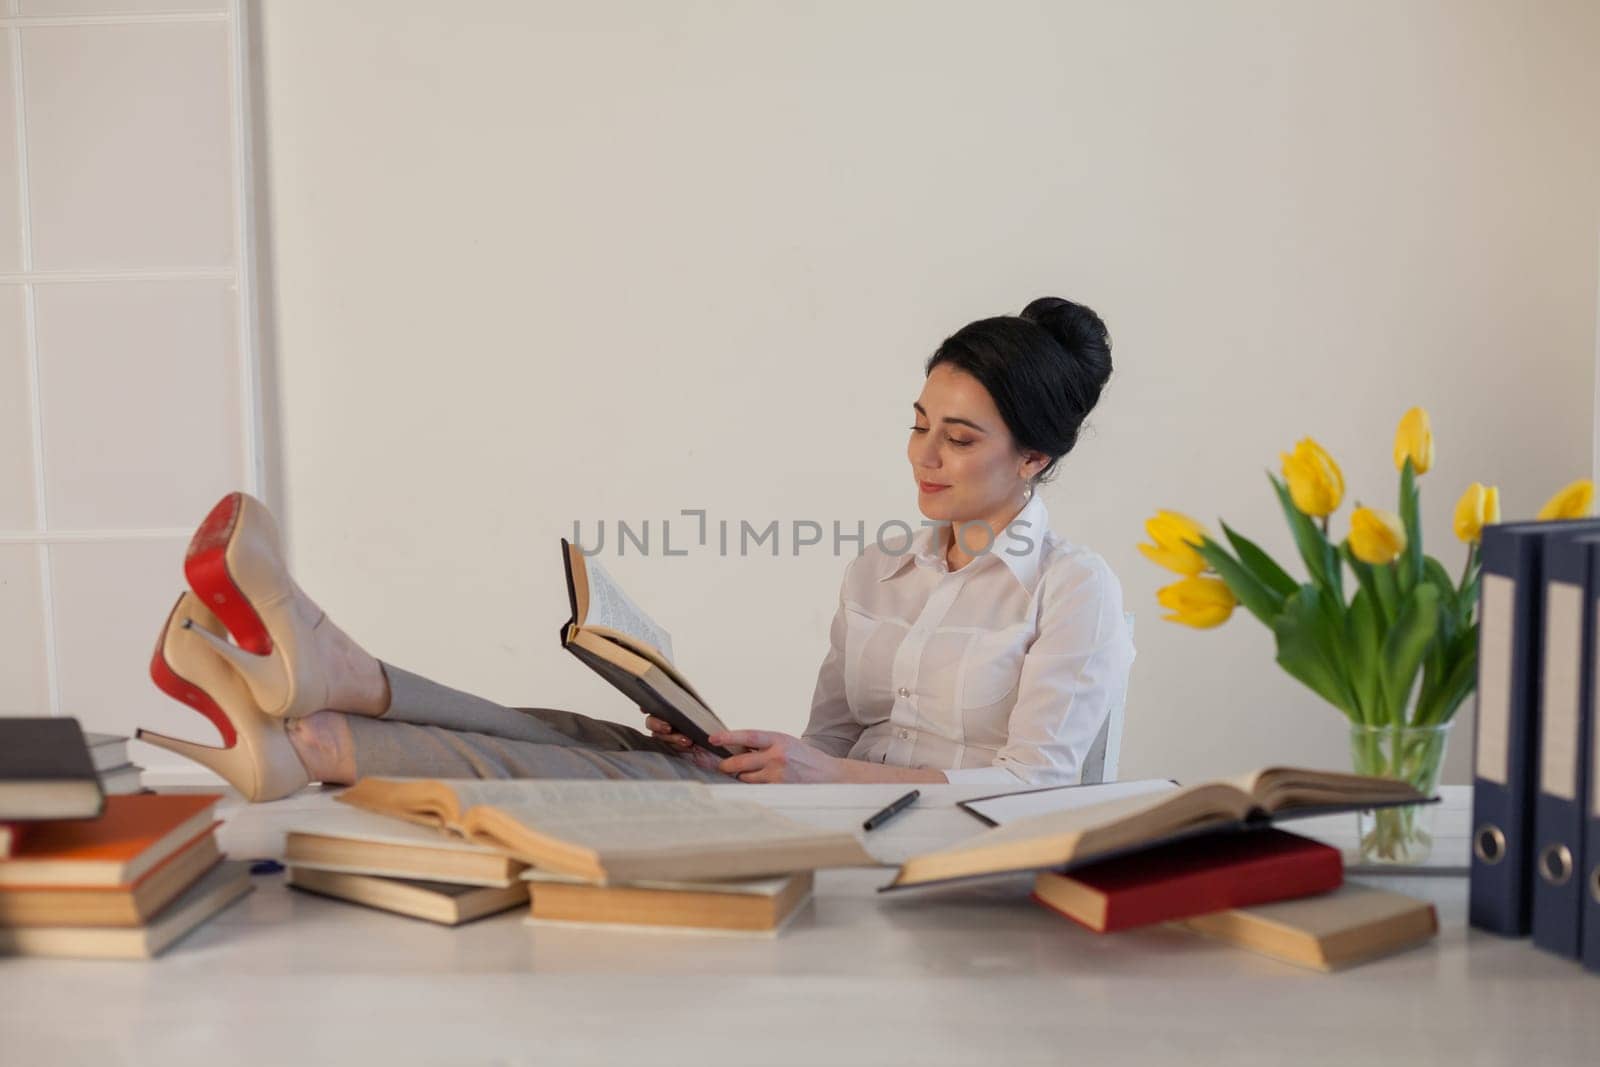 a woman in a business suit reads books in the Office by Simakov